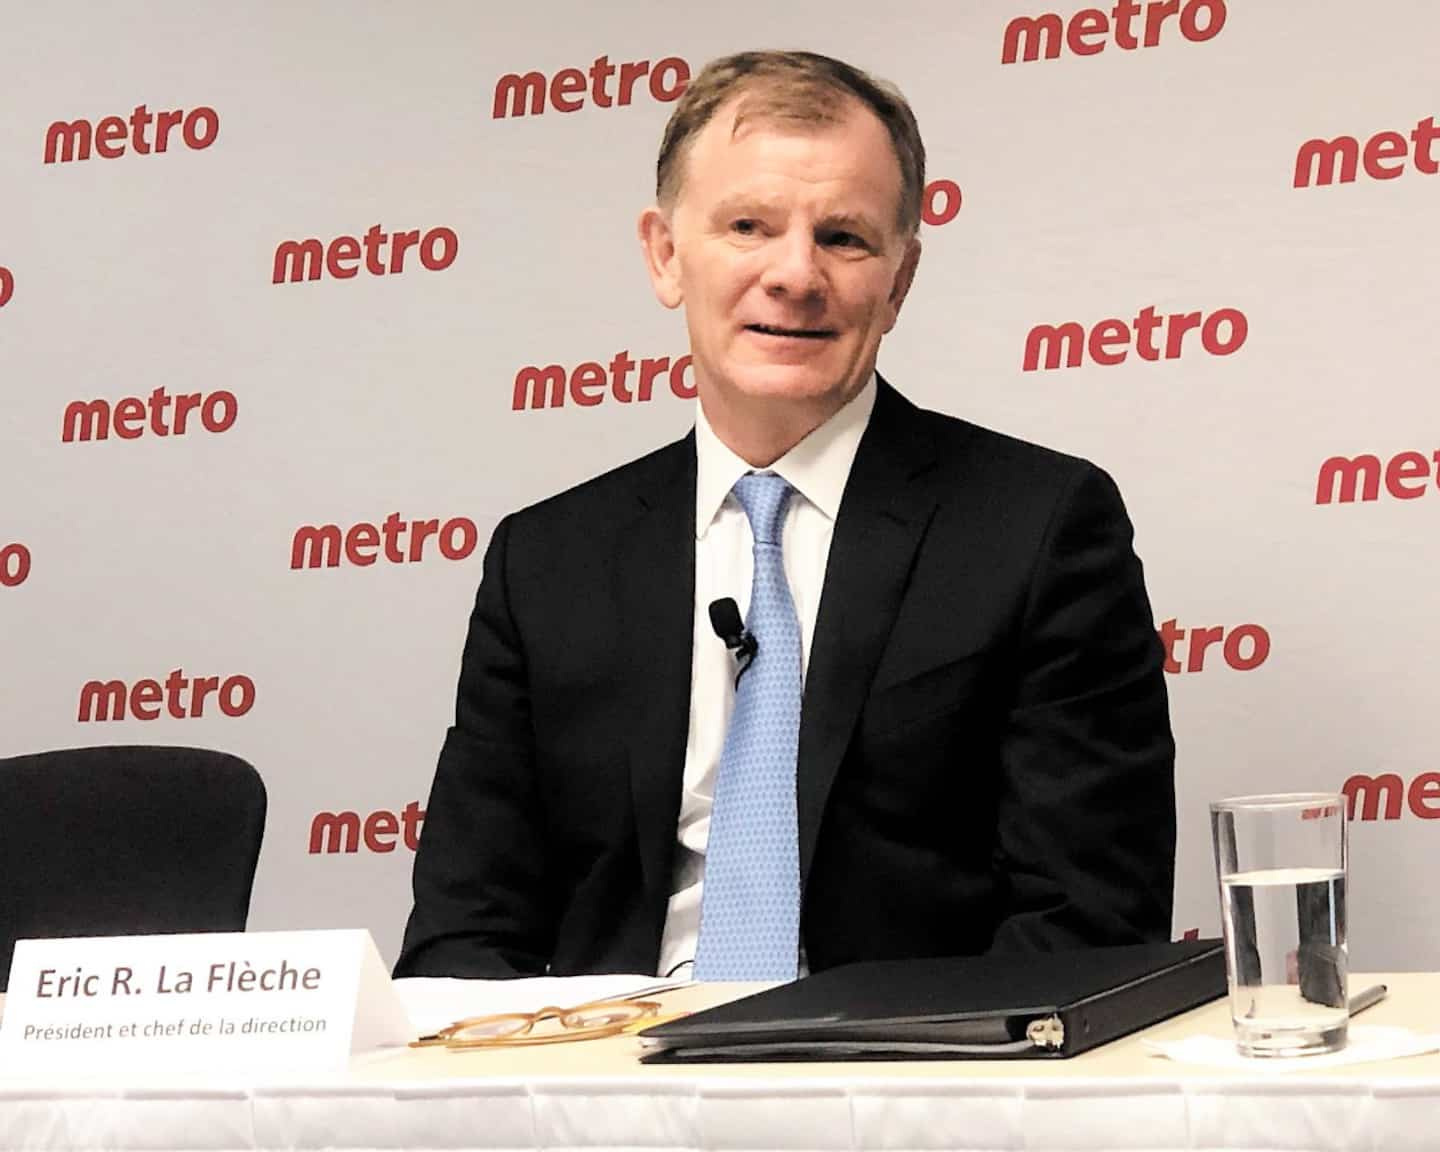 In the eye of Quebec inc: The CEO of Metro collects $ 3.2 million